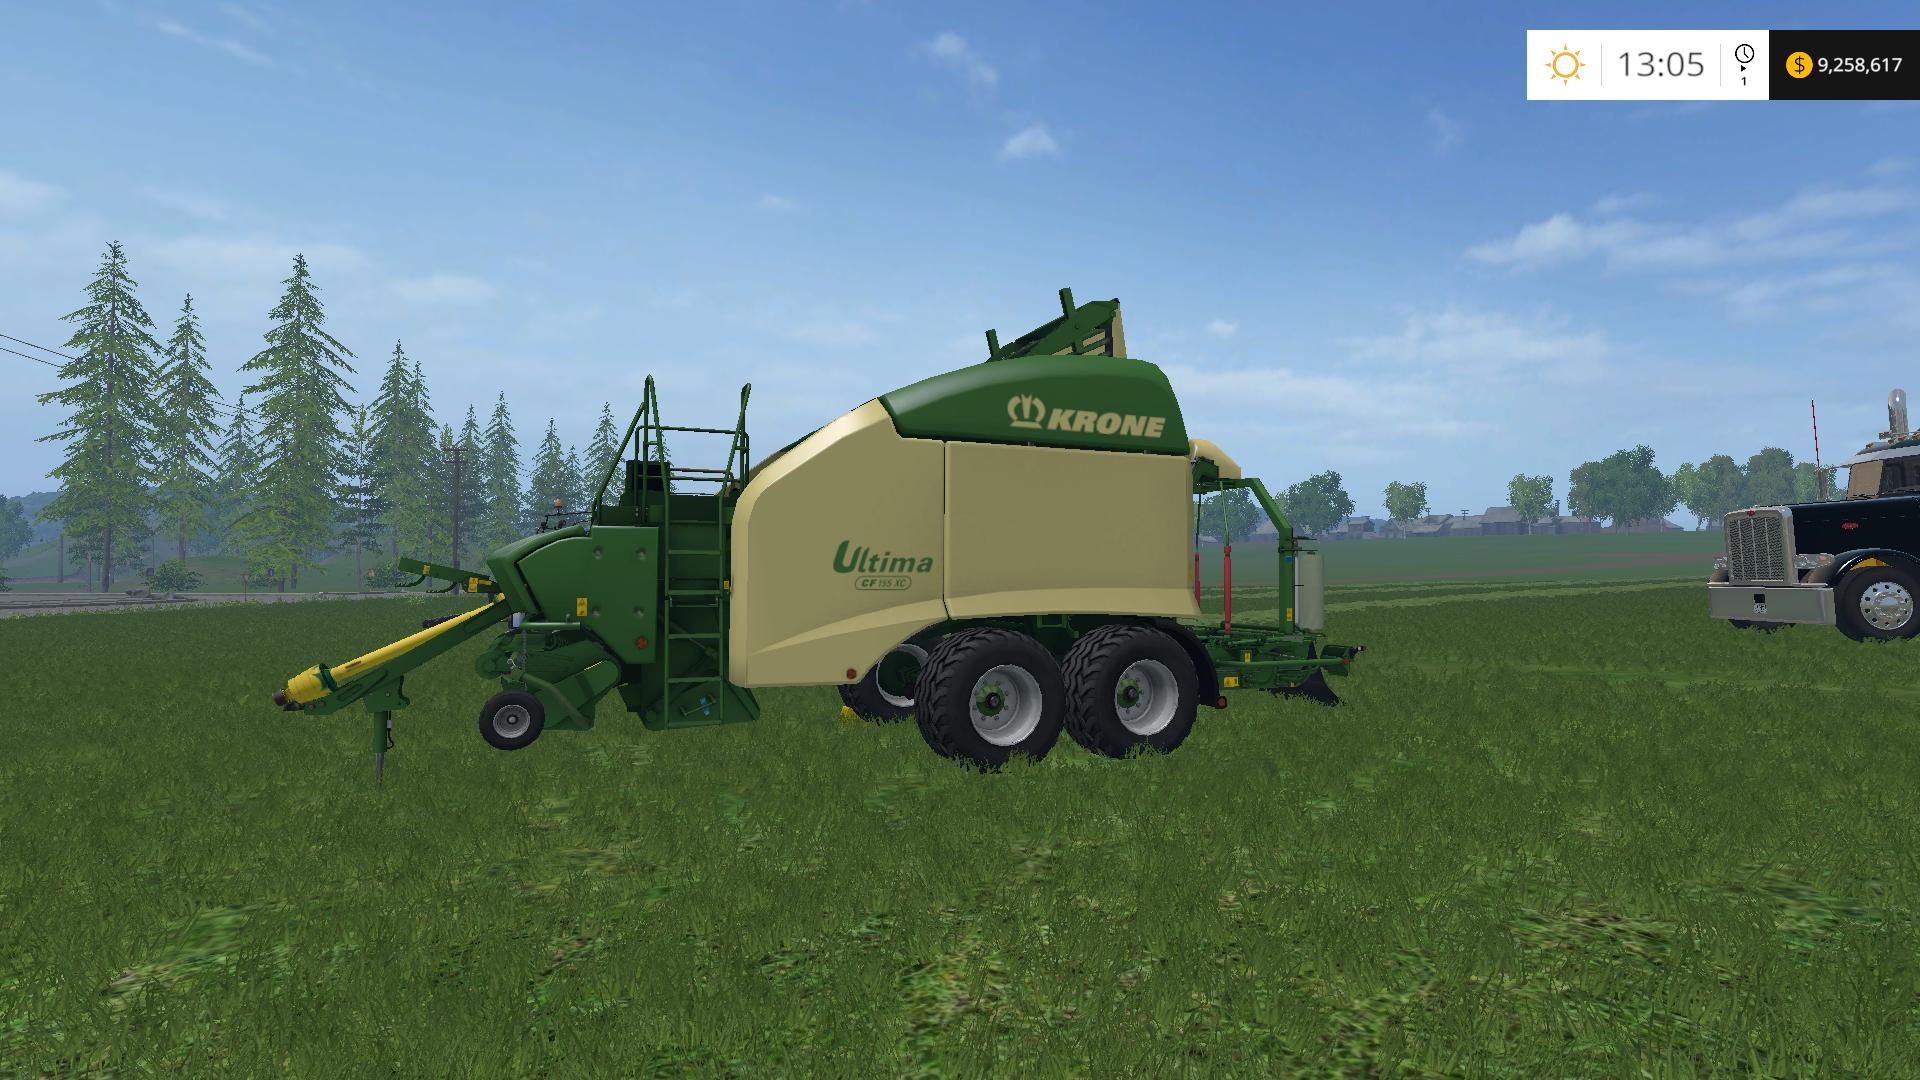 krone-ultima-cf155xc-1-4-bale-reworked-v1_1.png